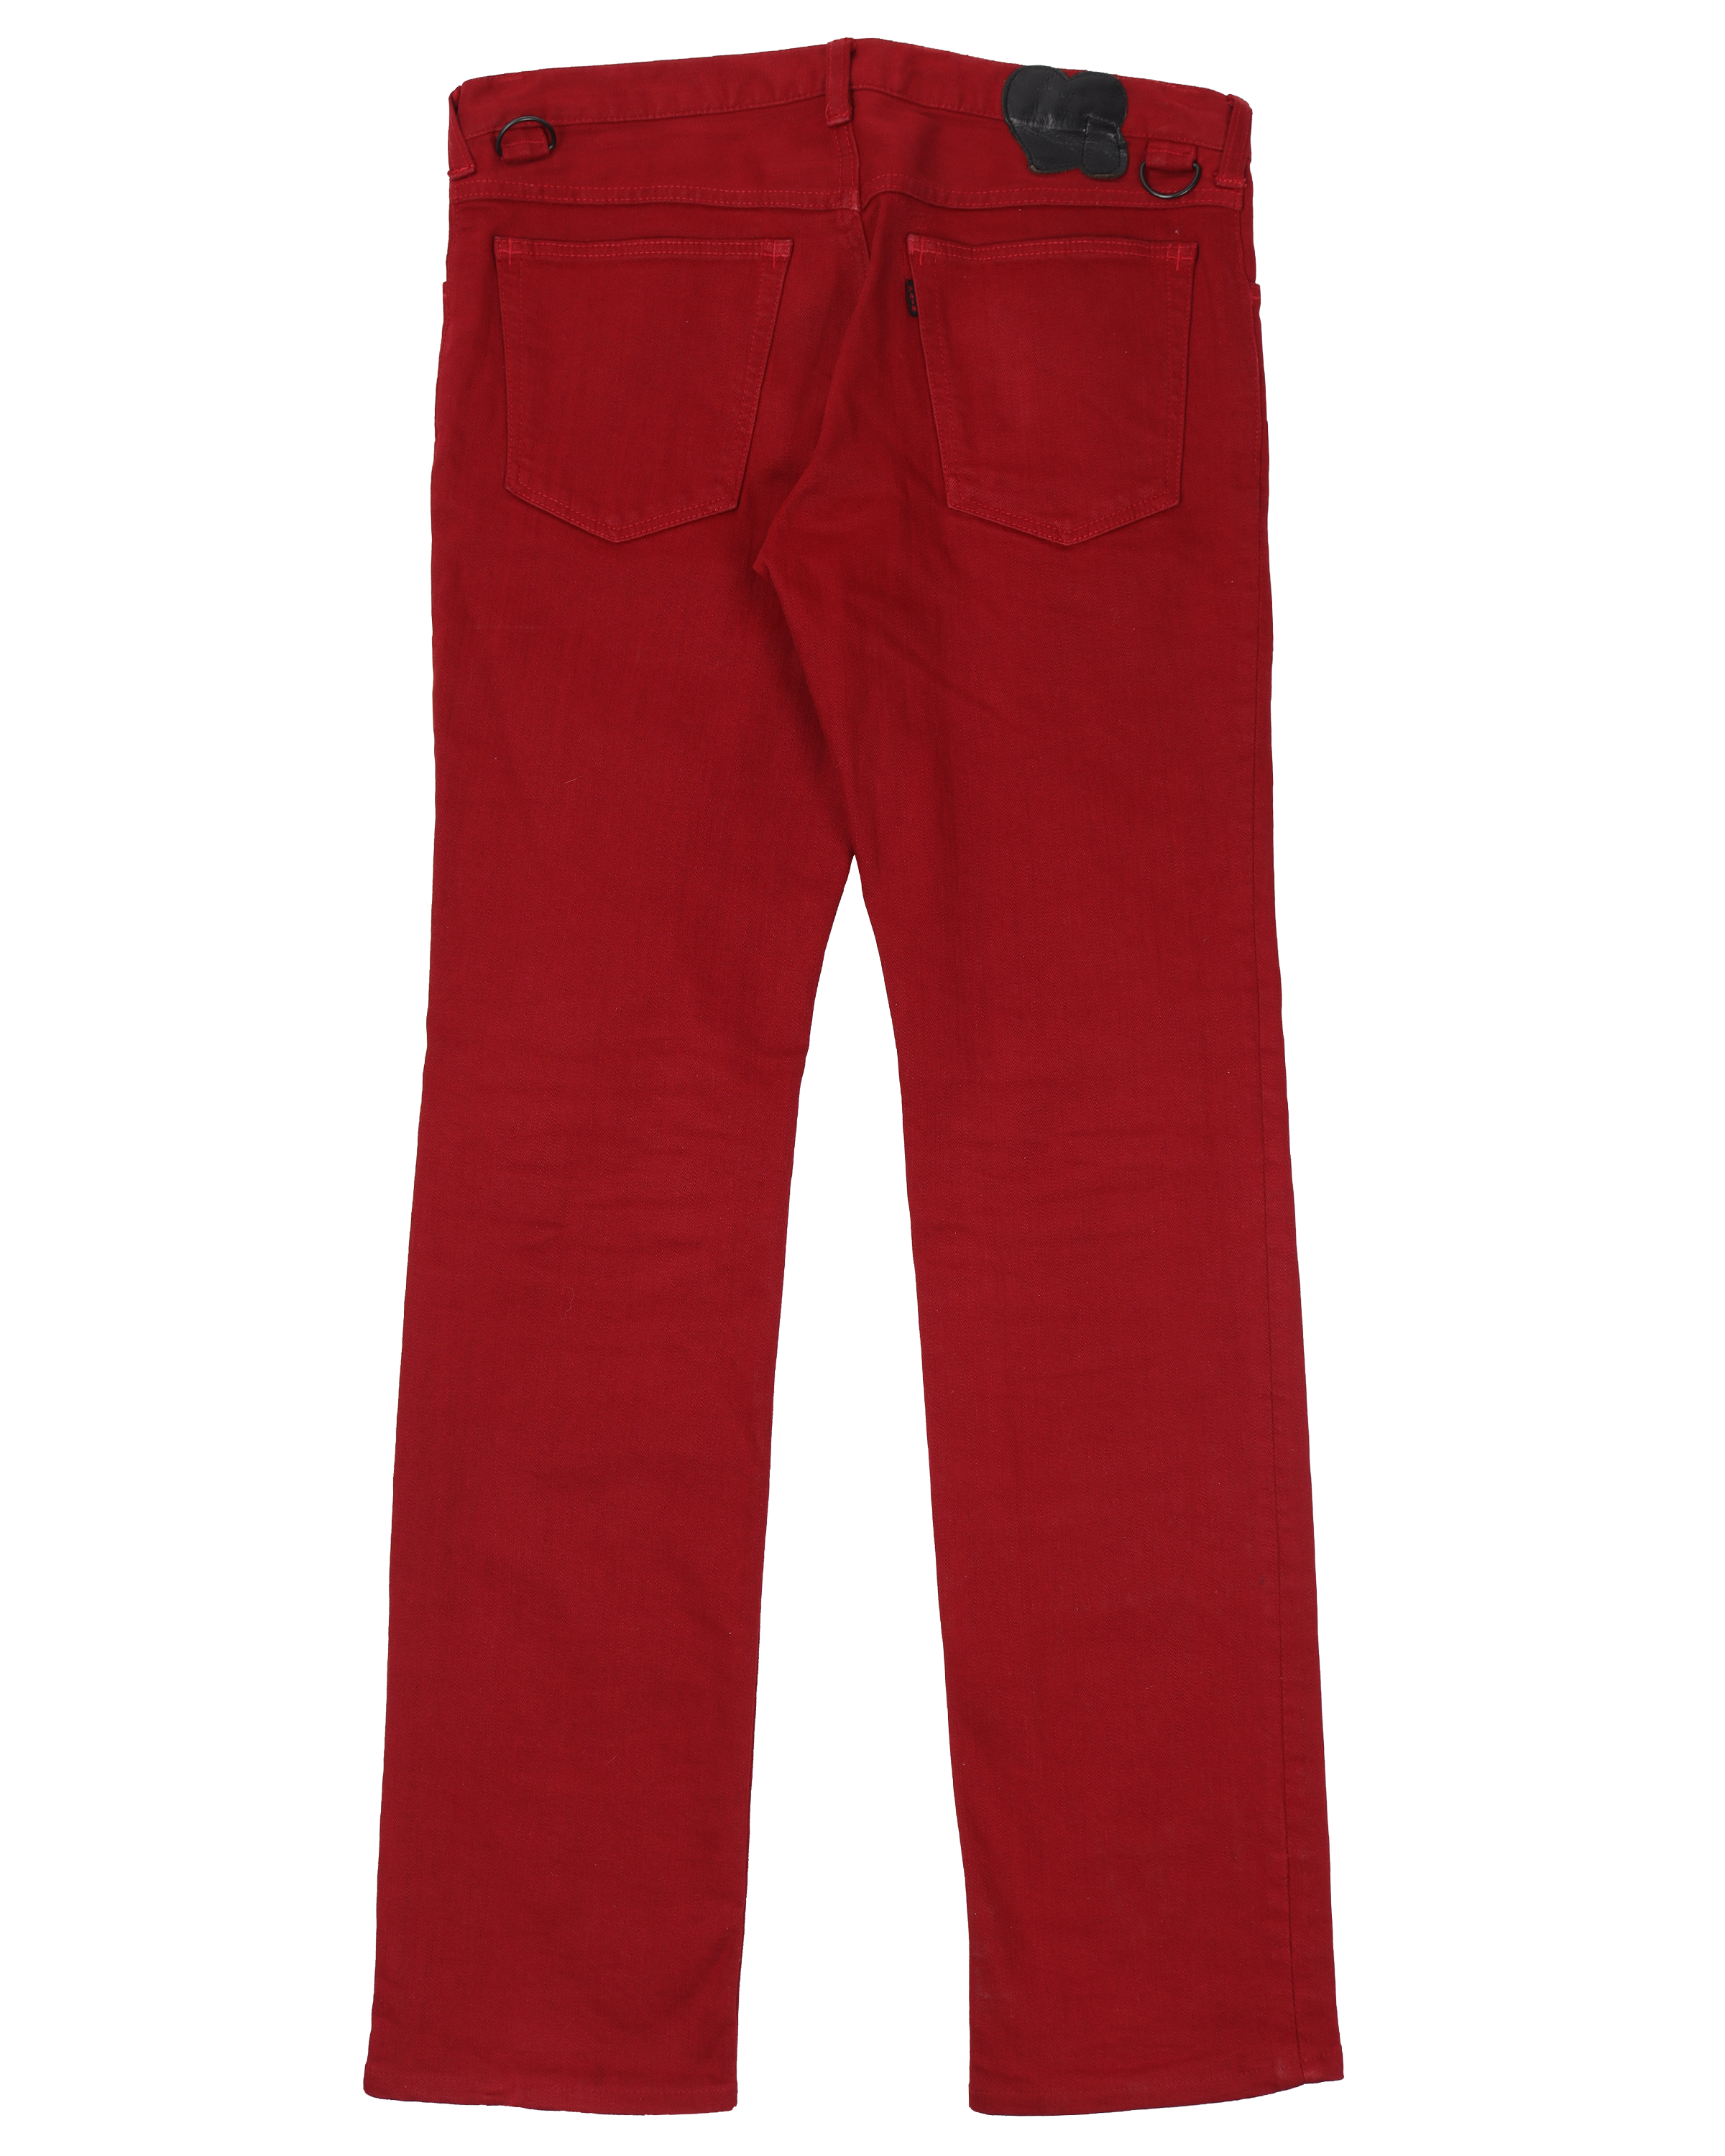 AW08 "My Own Private Portland" Red Denim